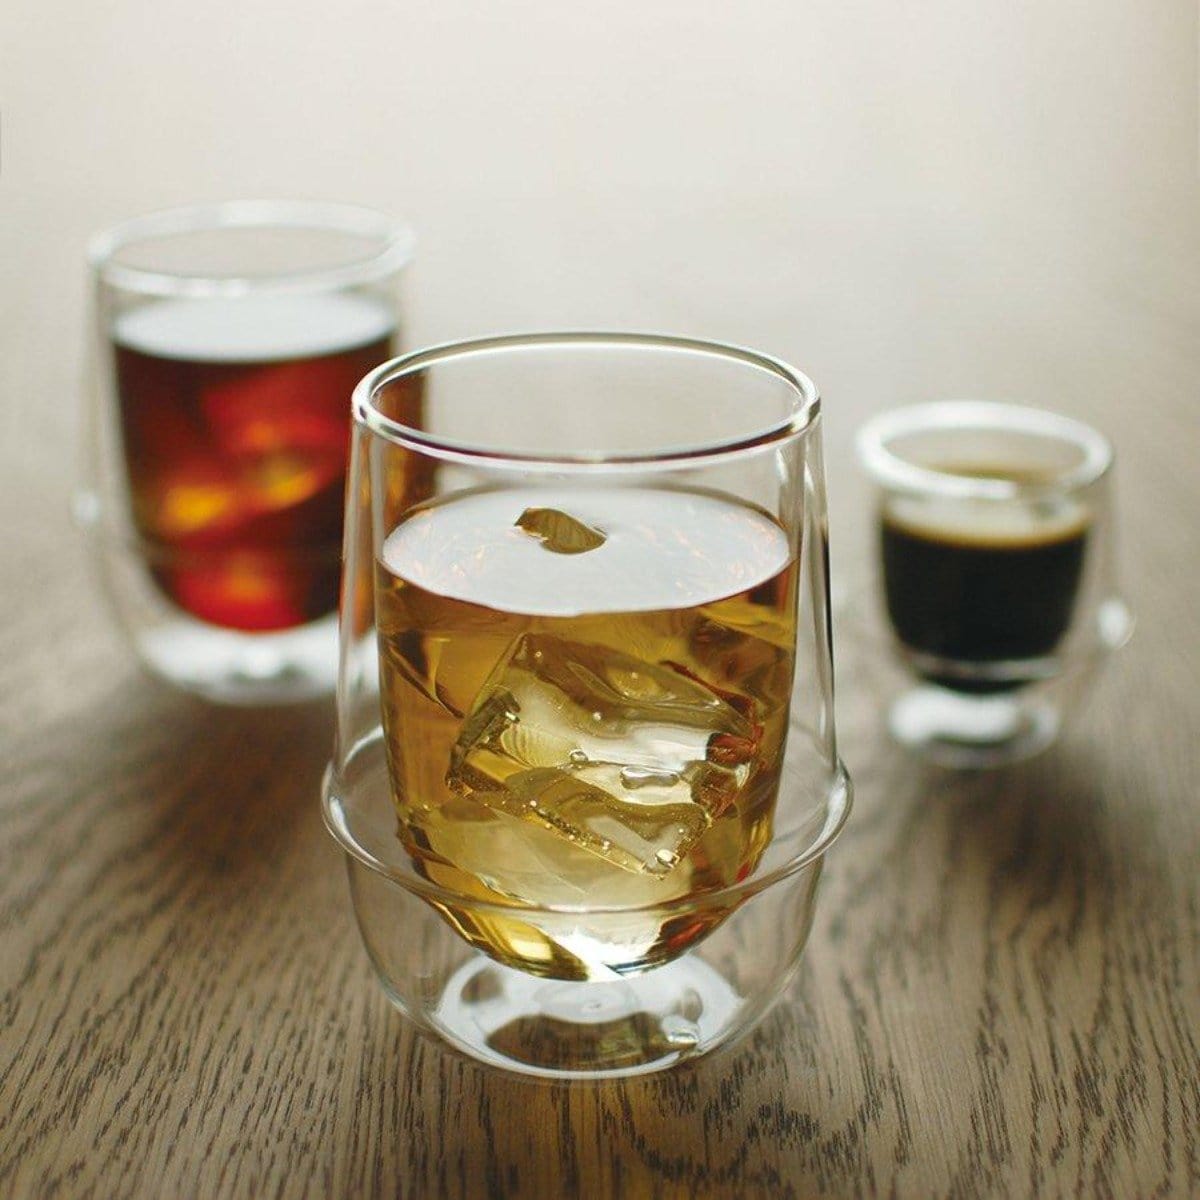 Three double-walled glass mugs are shown on a wooden table. One contains an amber-colored drink with ice cubes, another has a dark brown beverage, and the third, smaller mug holds a dark espresso shot. The amber drink is a refreshing blend of organic tea that perfectly complements the setting in the Kinto Double-Walled Iced Tea Glass: 350mL by Magic Hour.